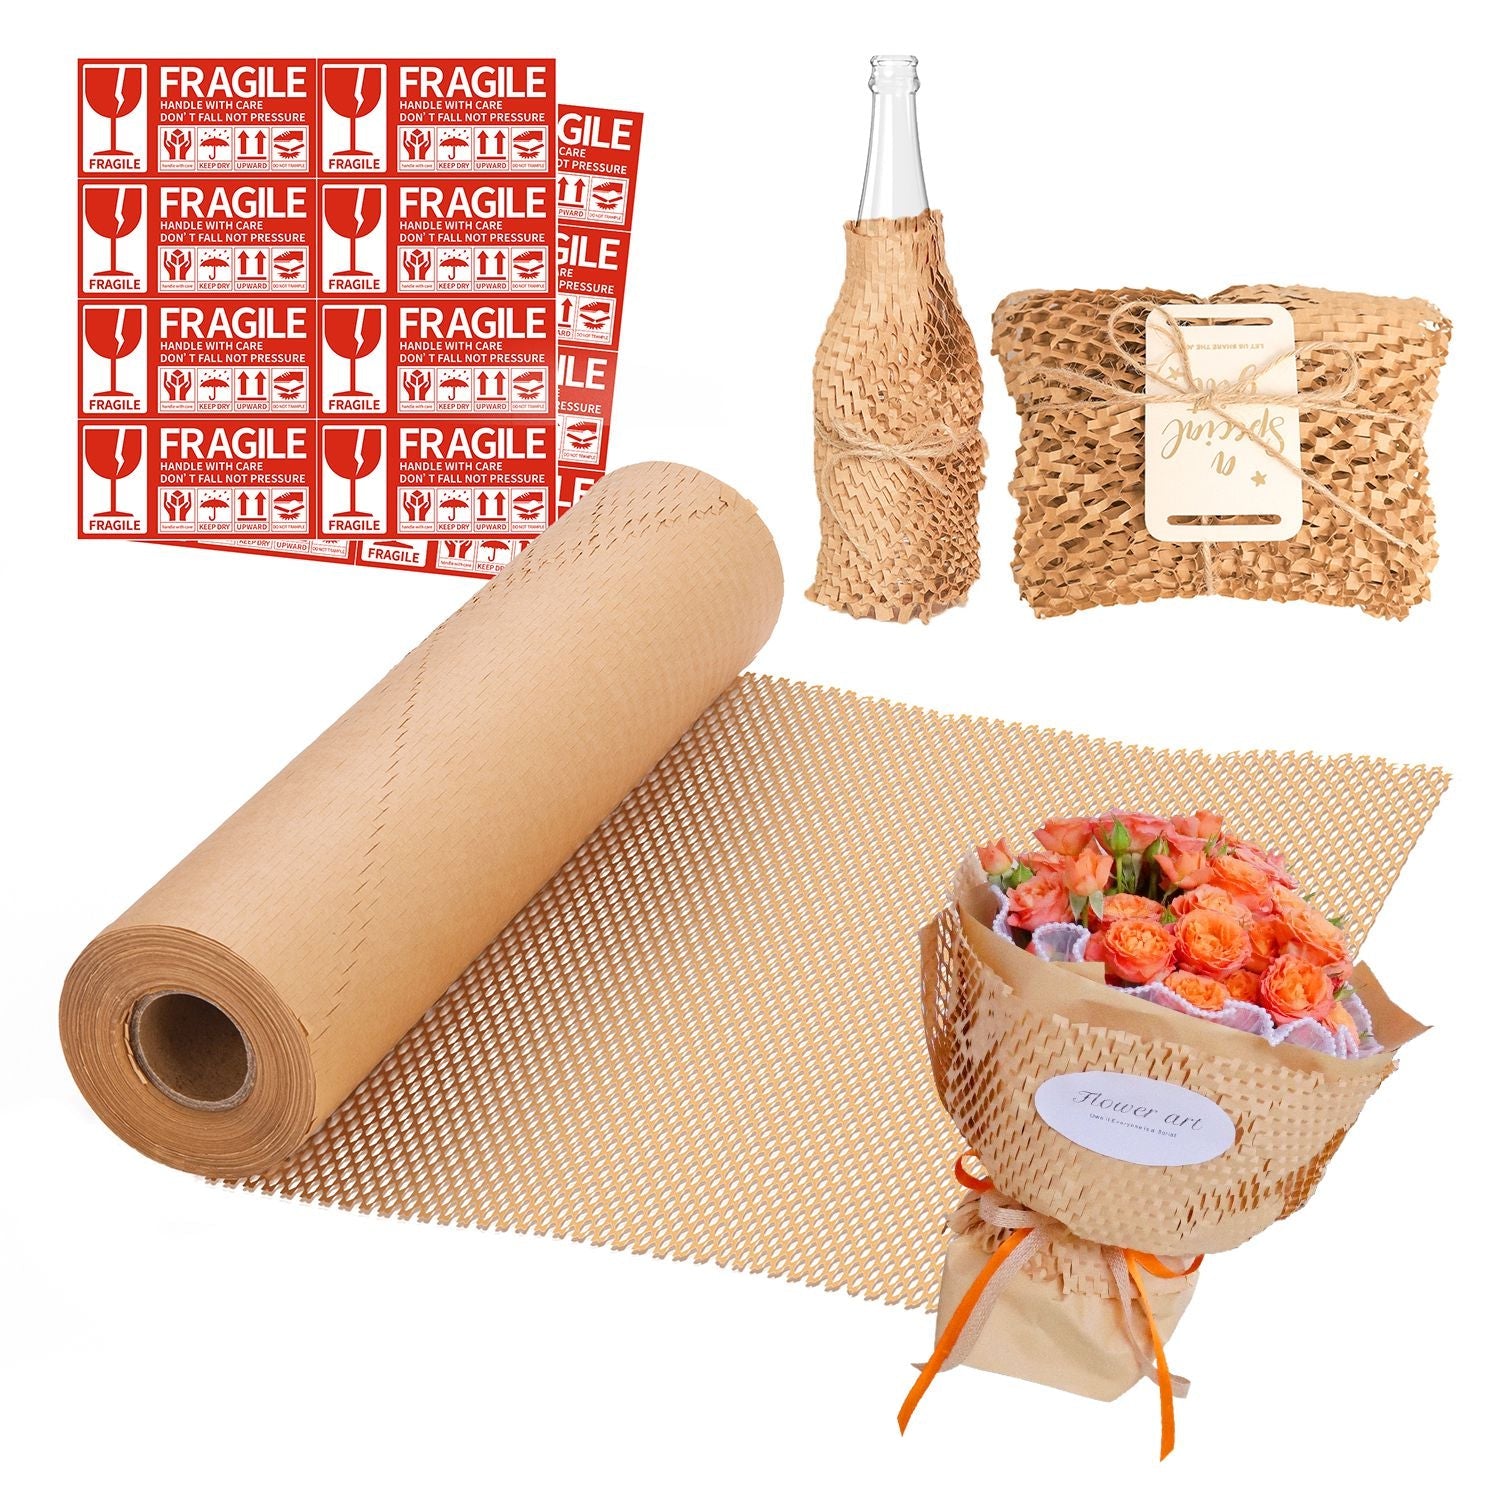 MUNBYN honeycomb paper is also an excellent choice for gift wrapping or decorative packaging, as the unique texture of the honeycomb pattern adds a stylish and modern touch to any package. 